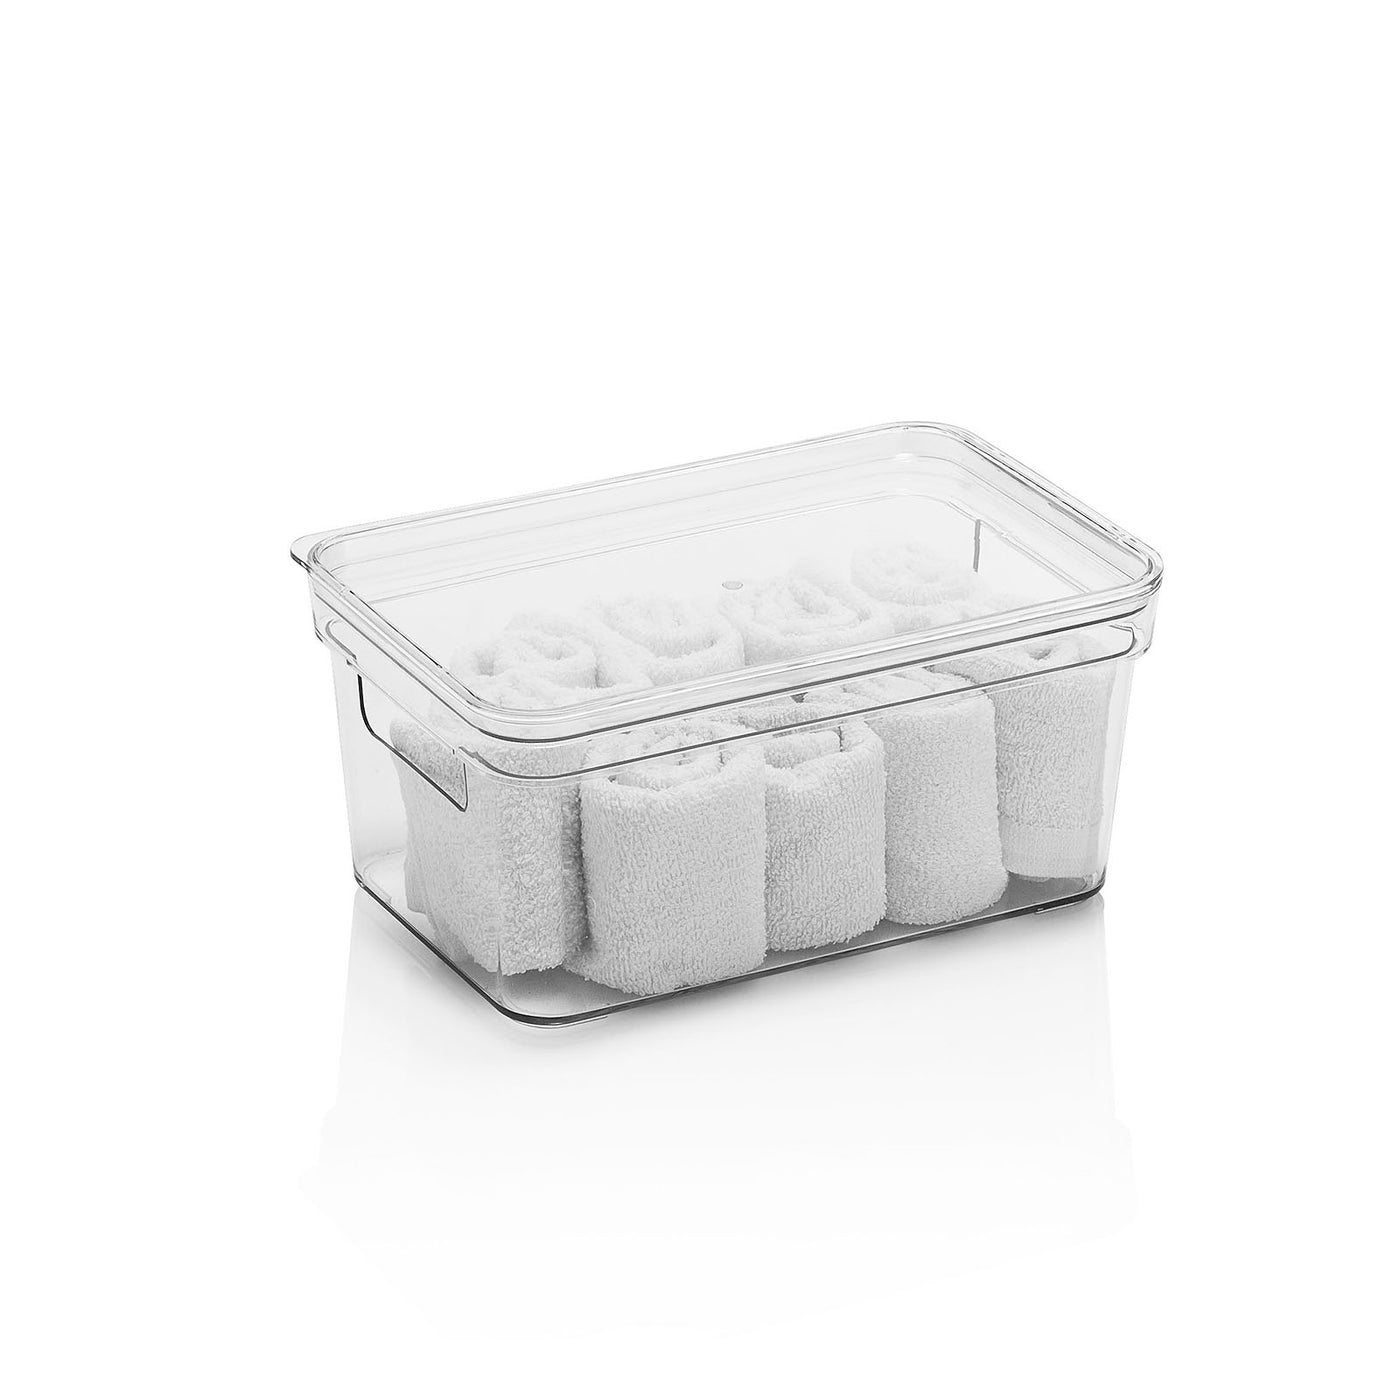 YAMBI-A container with lid